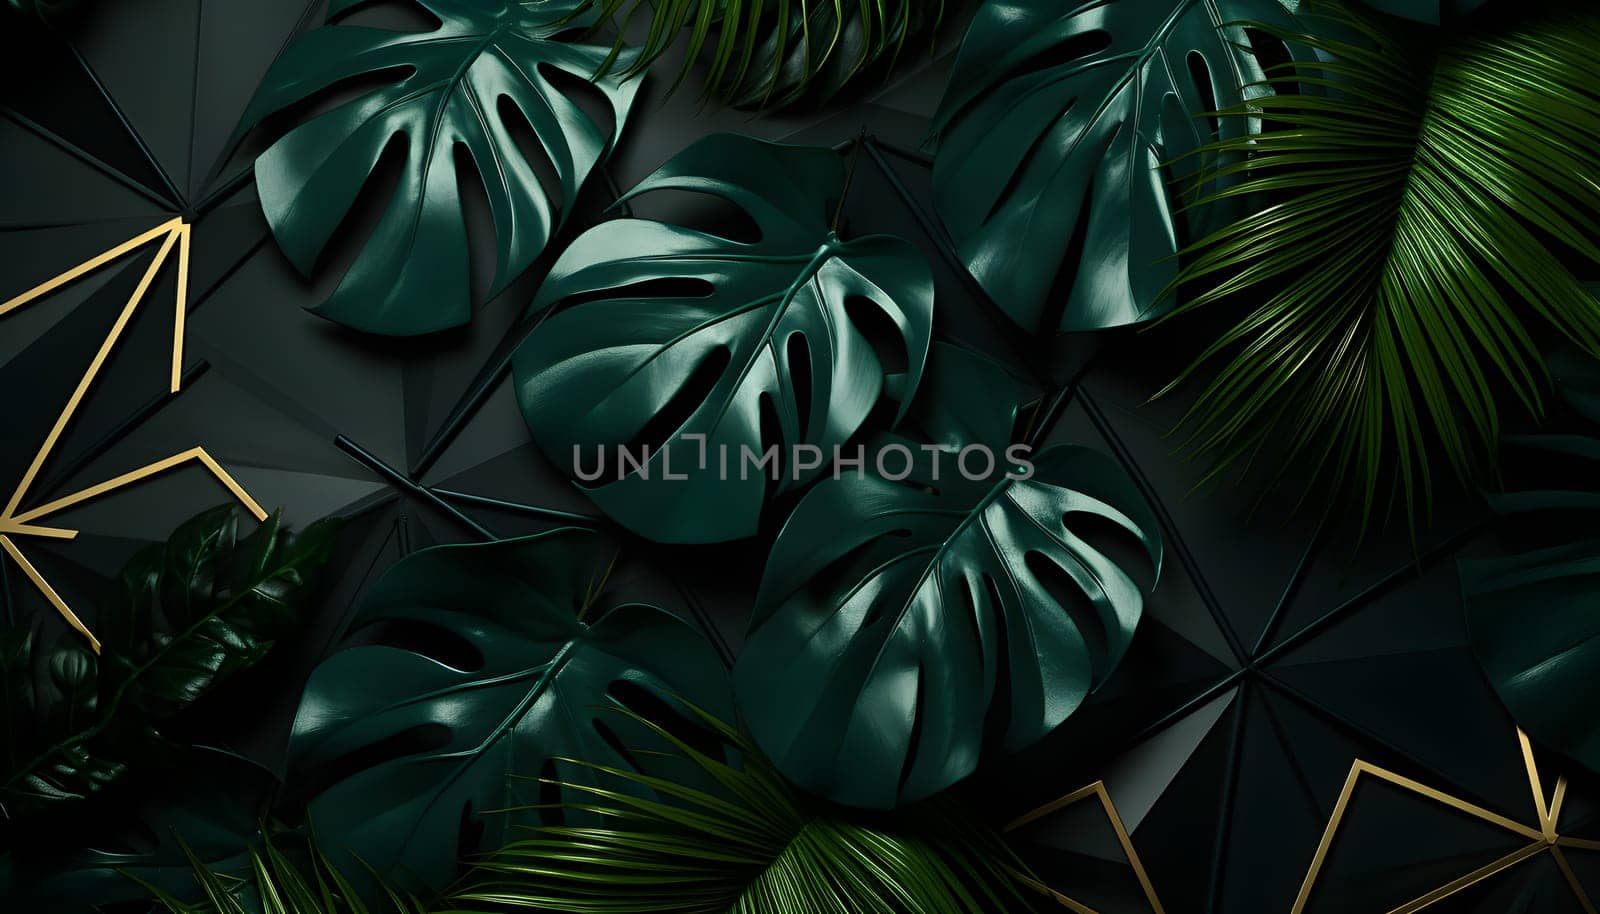 A captivating display of creative design featuring tropical green leaves entwined with shimmering gold triangles on a dramatic black background. The intricate arrangement forms a mesmerizing visual composition that sparks intrigue and artistic wonder.